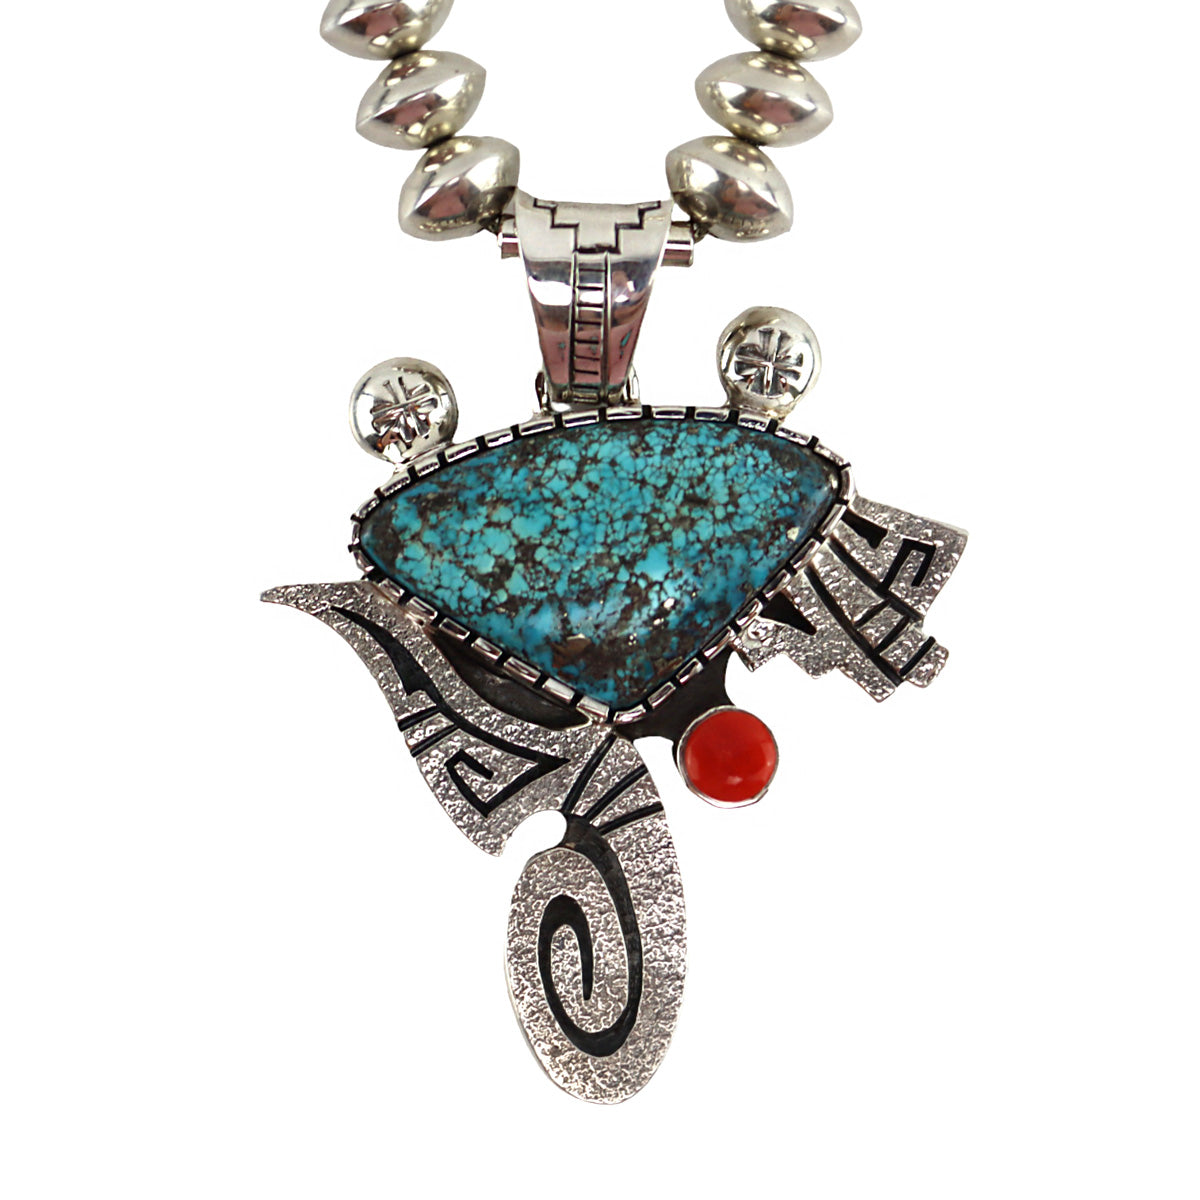 Roy Talahaftewa - Hopi - Contemporary Number 8 Turquoise, Coral, and Sterling Silver Beaded Necklace with Overlay Design, 22" Length (J16012)